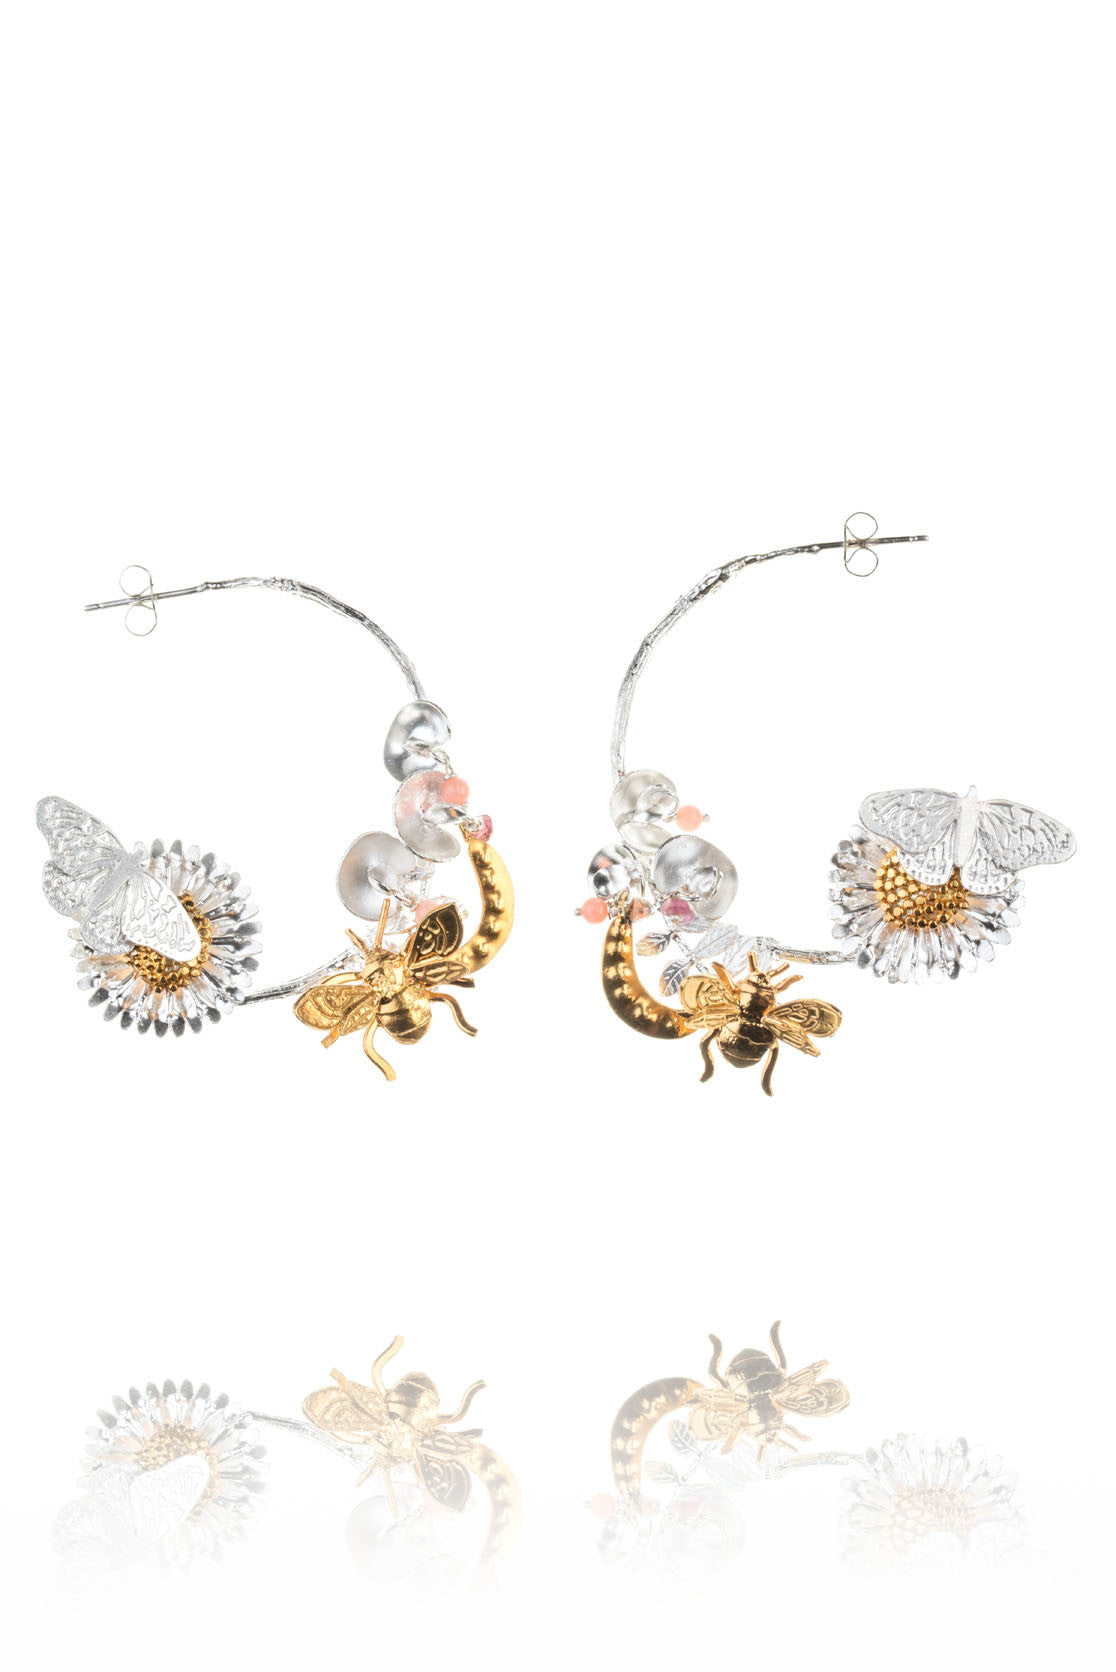 Sweet Pea, Bee, Butterfly and Daisy Statement Earrings In Sterling Silver And Gold